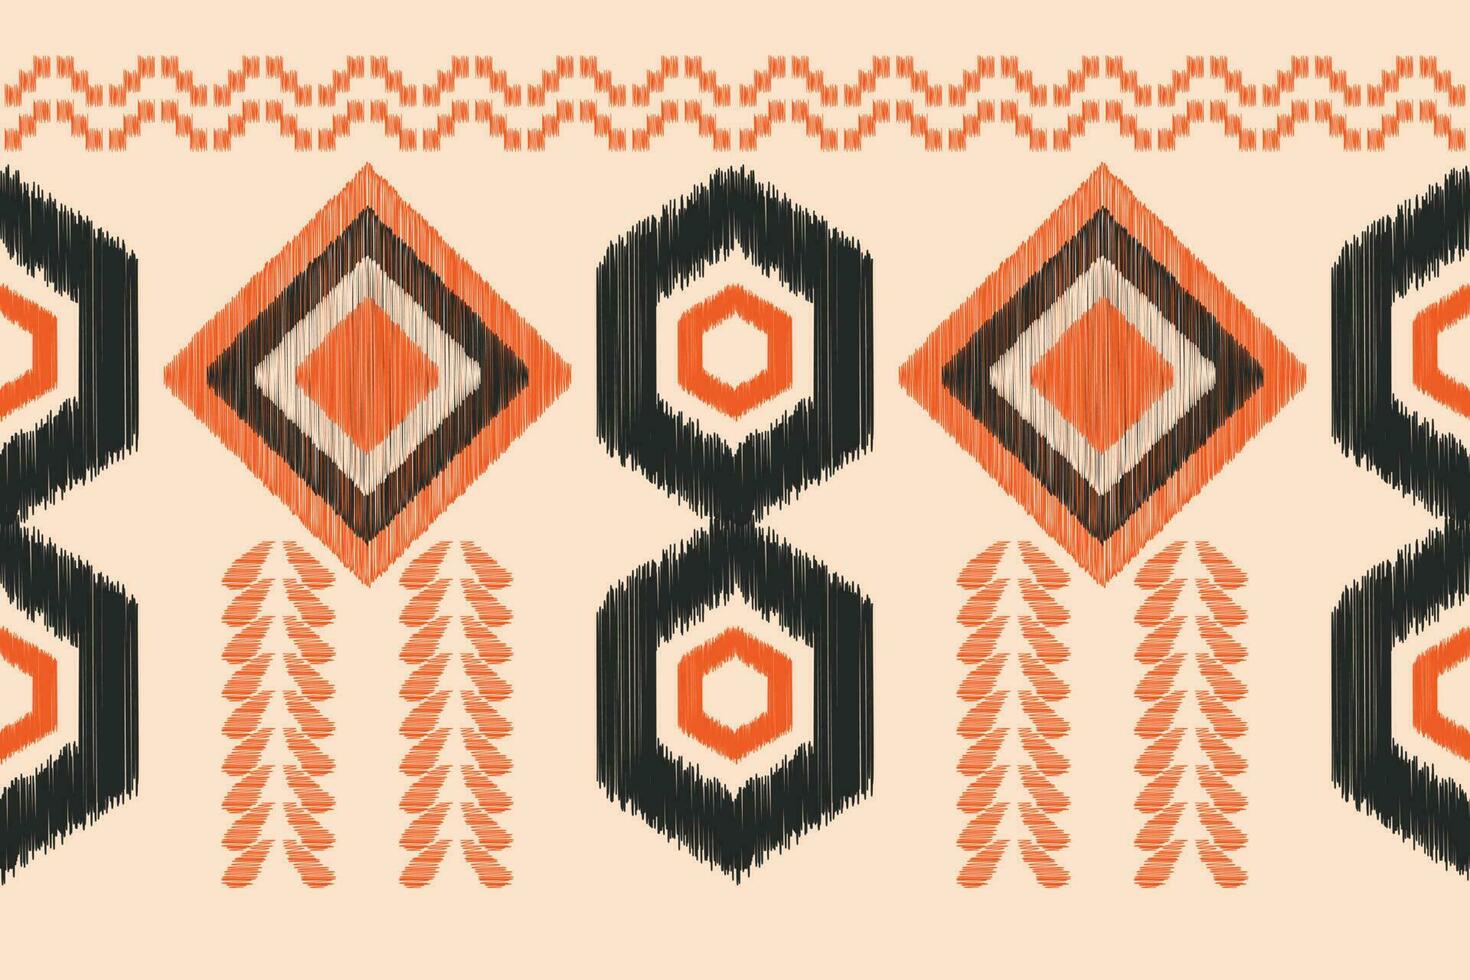 Ethnic Ikat fabric pattern geometric style.African Ikat embroidery Ethnic oriental pattern brown cream background. Abstract,vector,illustration.For texture,clothing,scraf,decoration,carpet,silk. vector